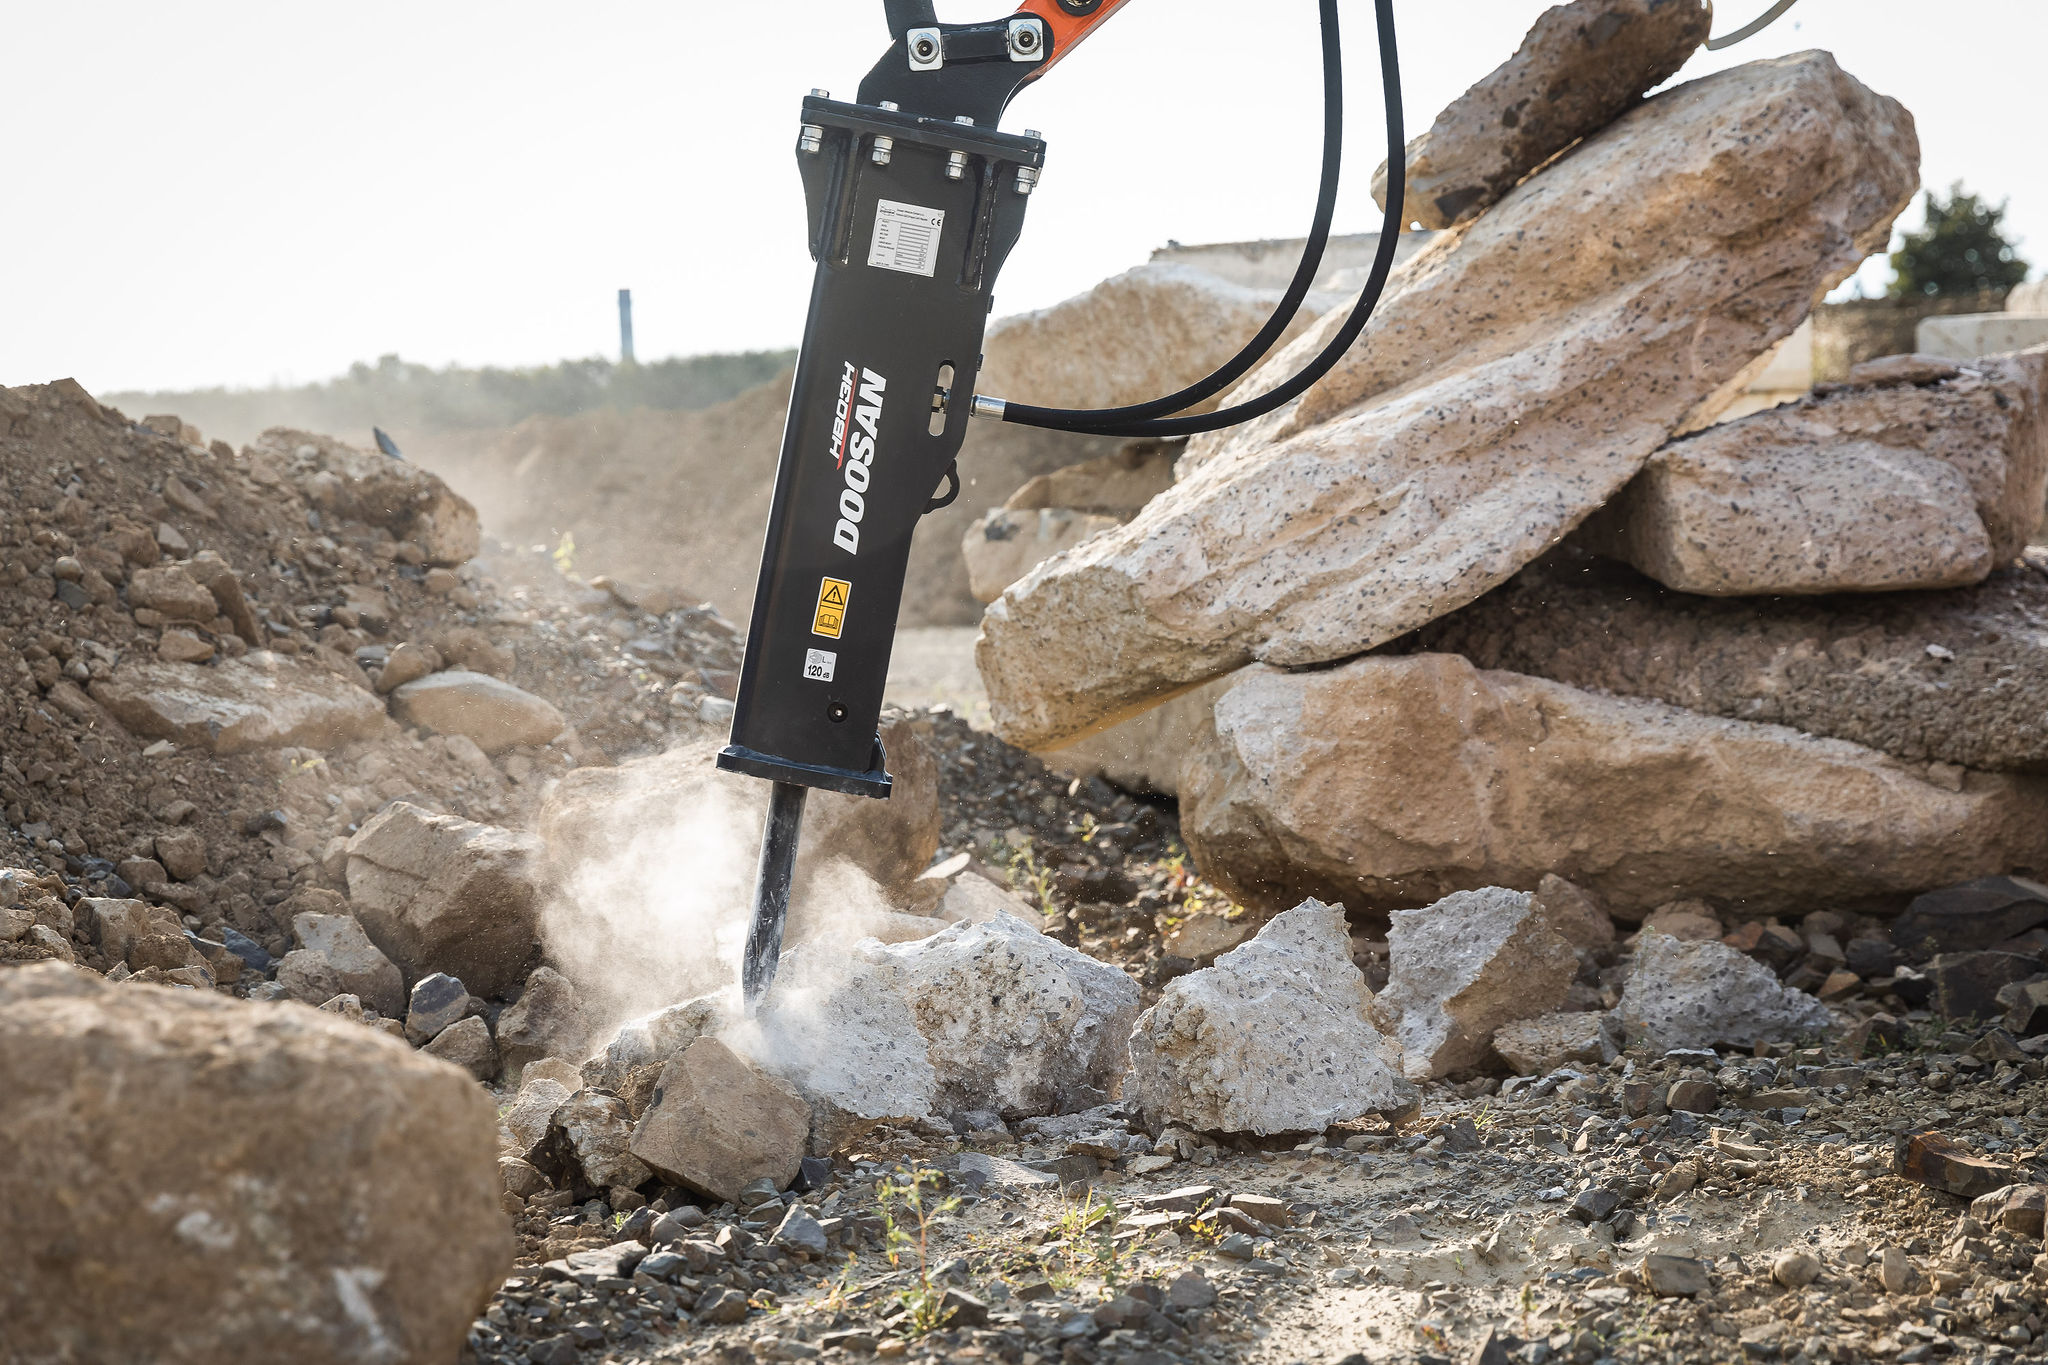 The new breakers are suitable for quarrying, mining, demolition and construction